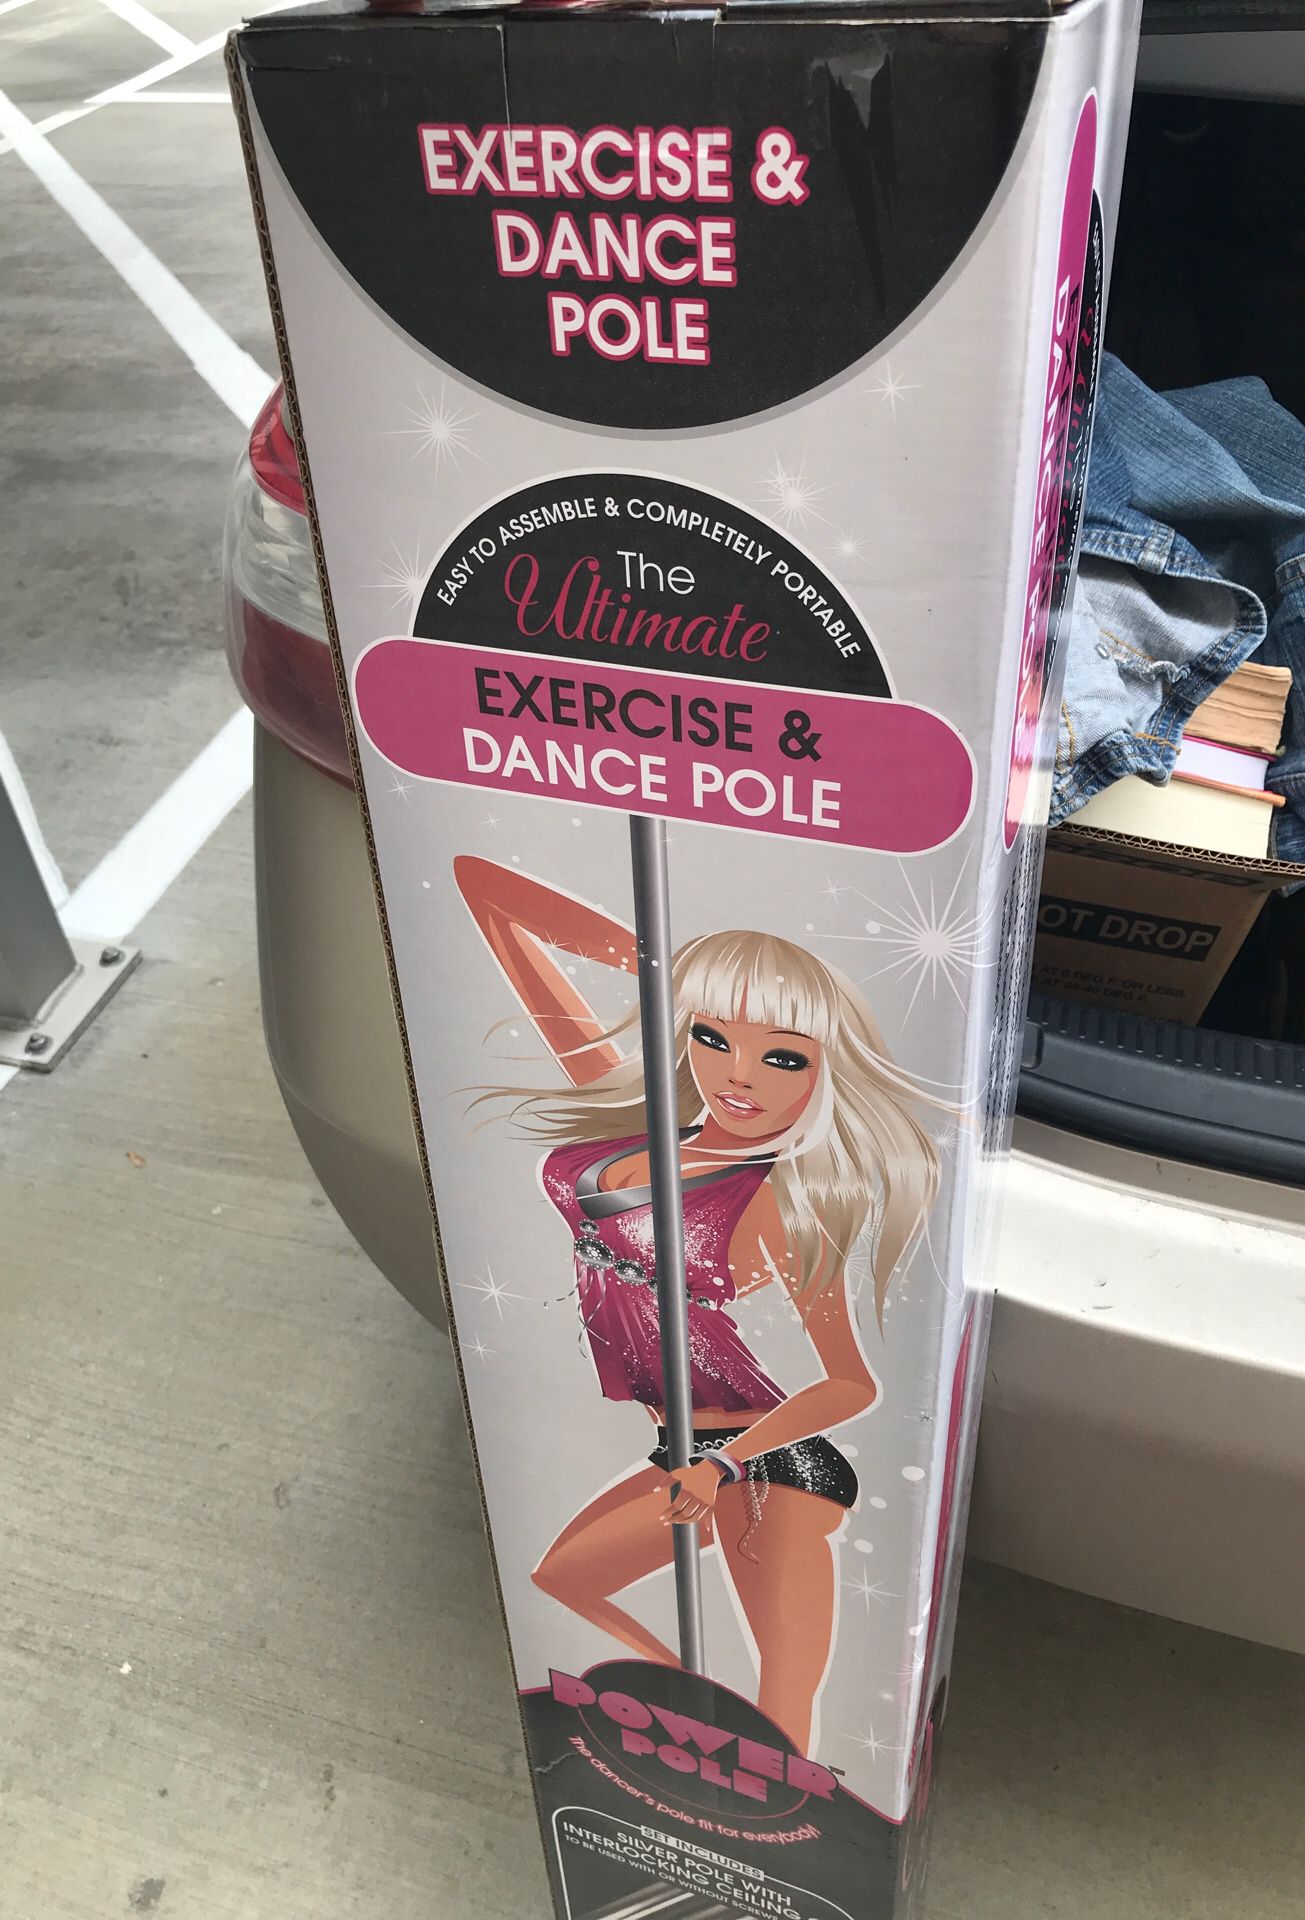 The ultimate exercise and dance pole